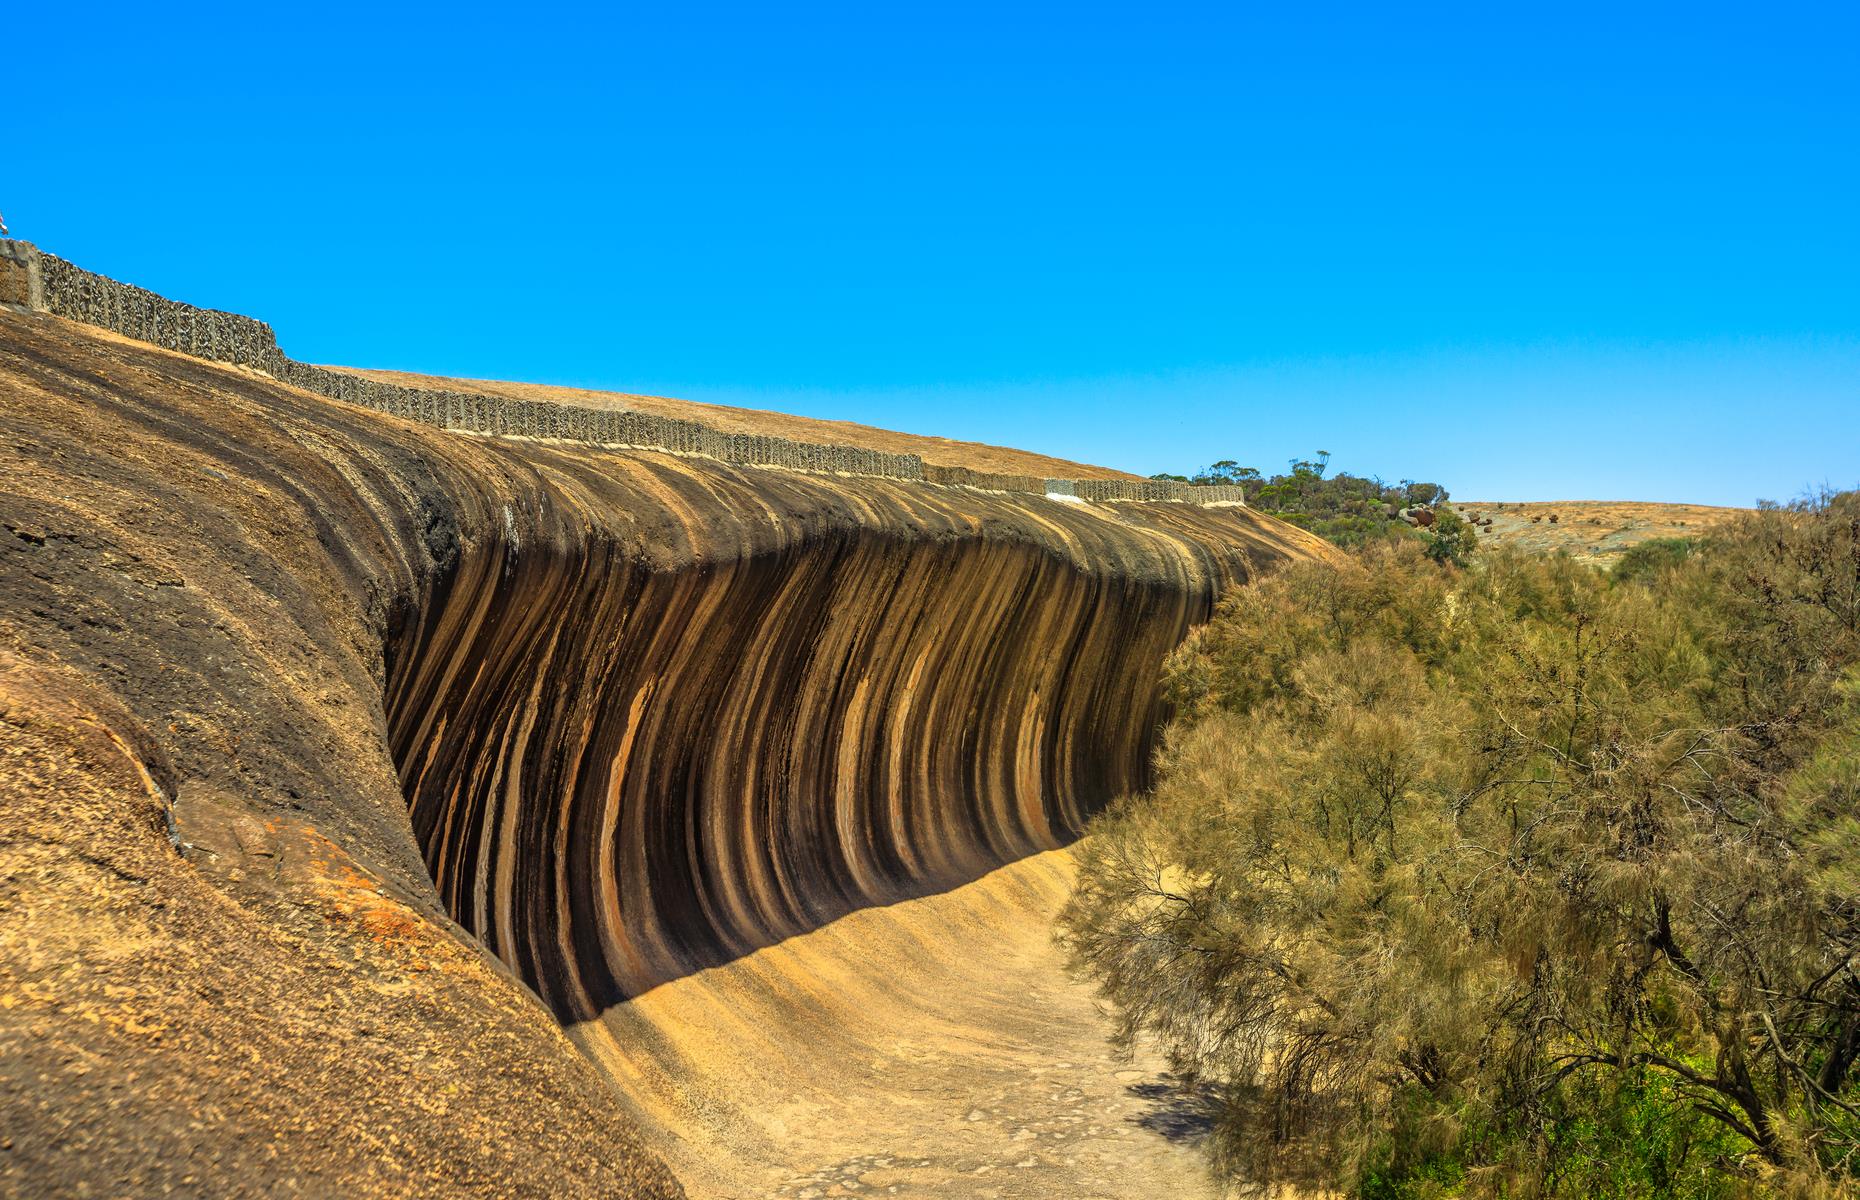 Australia is known for its big waves but you’ll find one of its most spectacular far away from the ocean – a four-hour drive east of Perth. The striking granite cliff known as Wave Rock rises 15m (49ft) above the outback plain in Western Australia’s Golden Outback region. The ancient rock formation is particularly spectacular from September to November when wildflowers carpet the region.